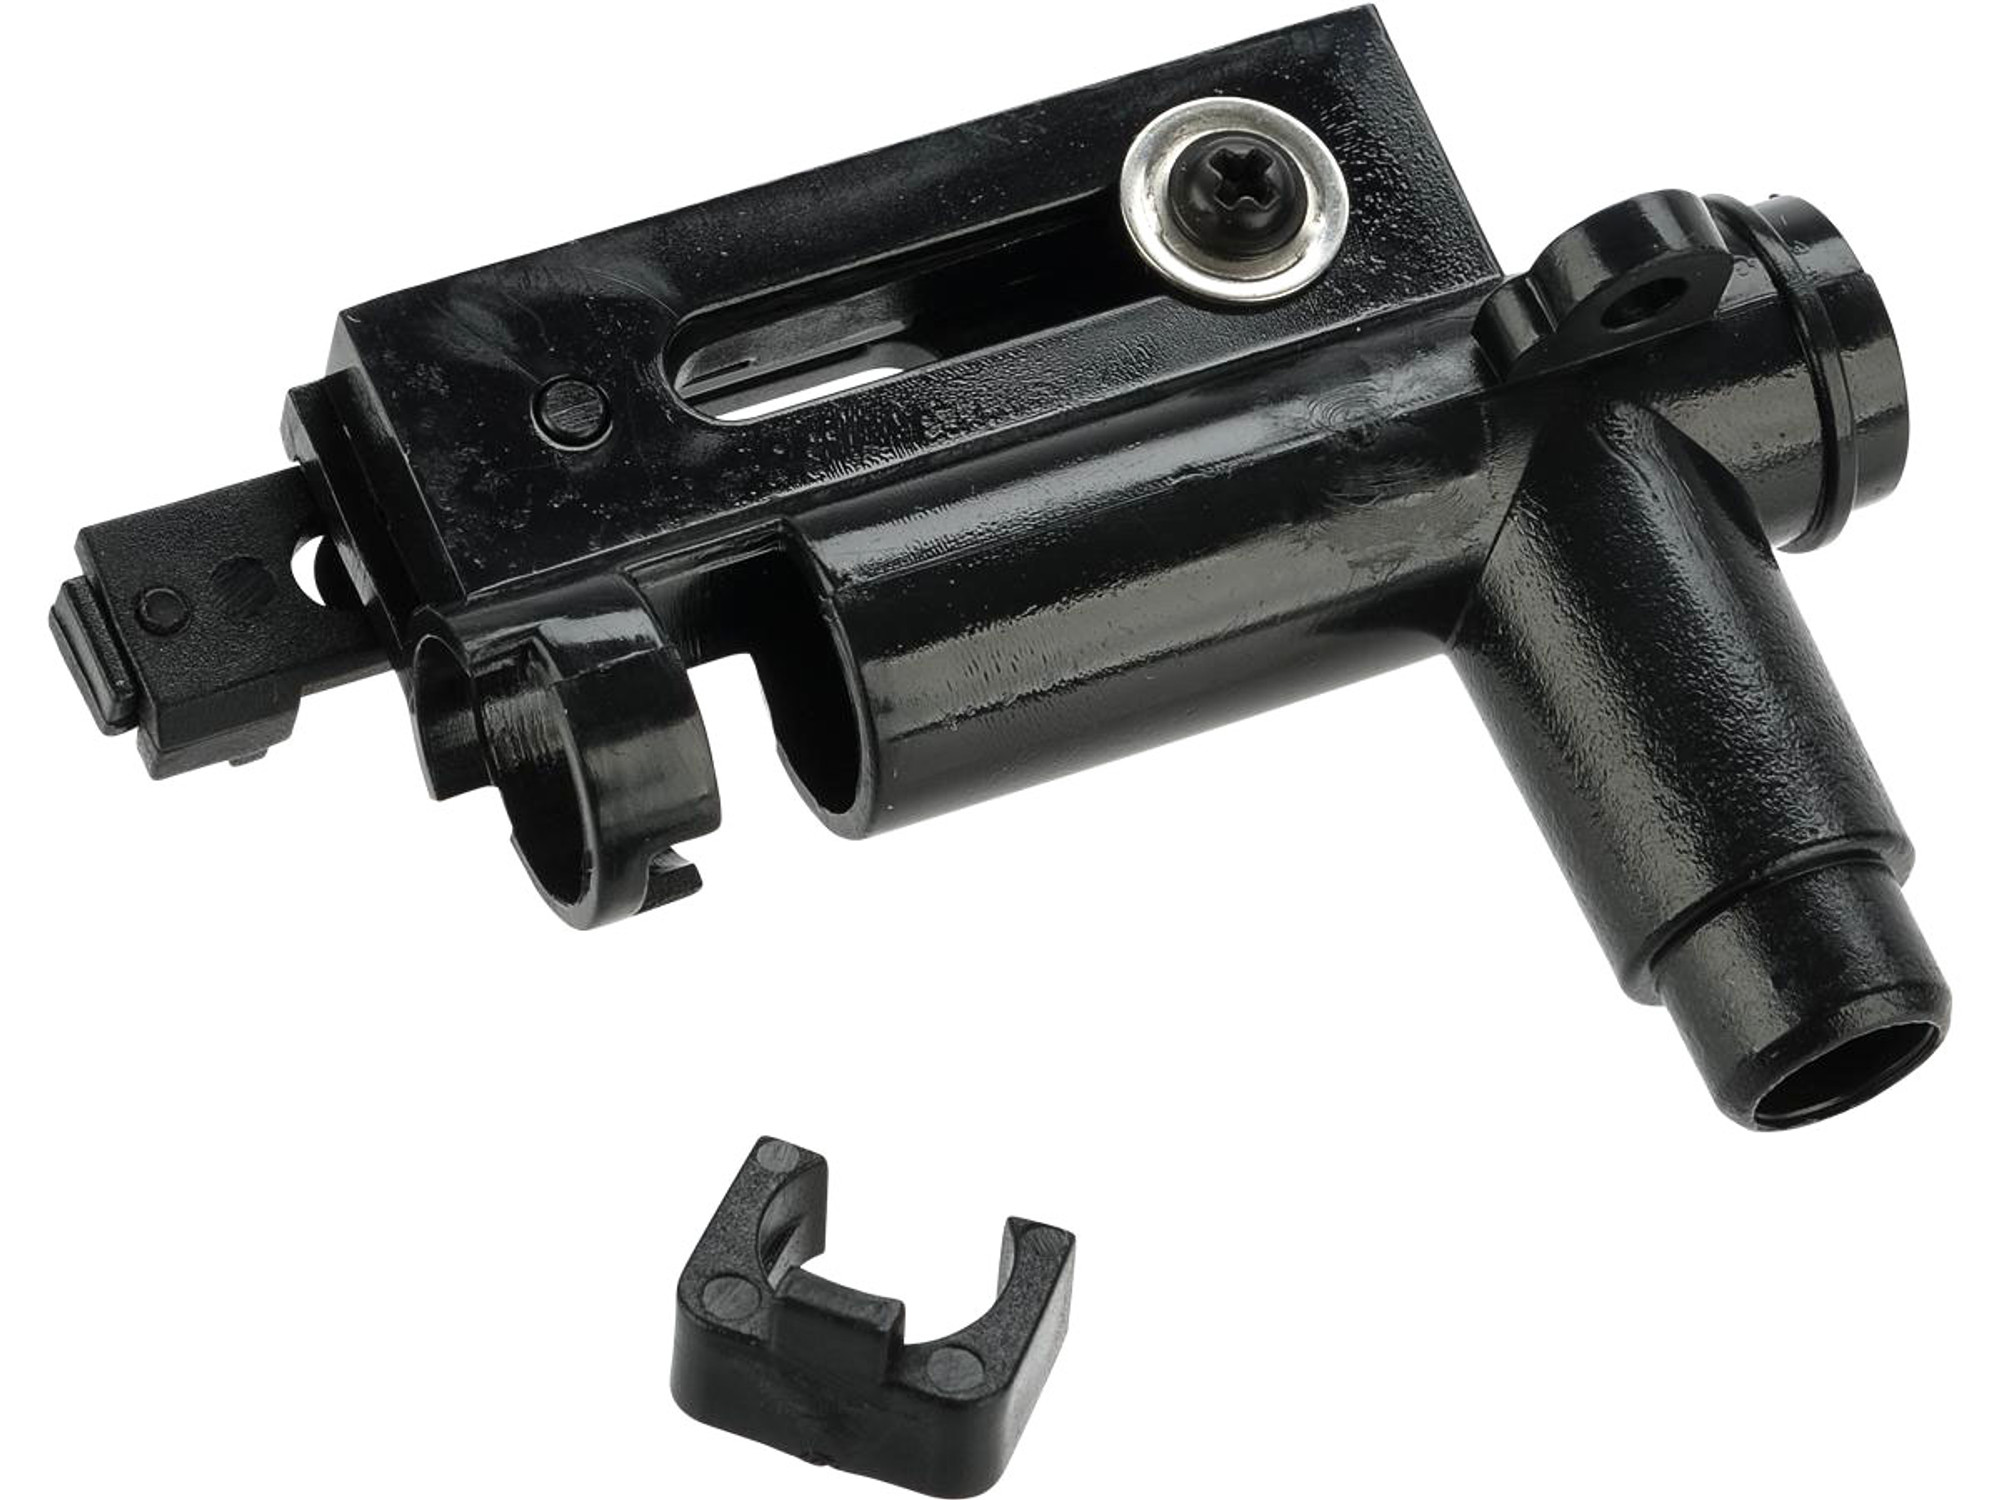 LCT Replacement LCK Hopup Assembly for AK Series AEG Rifles